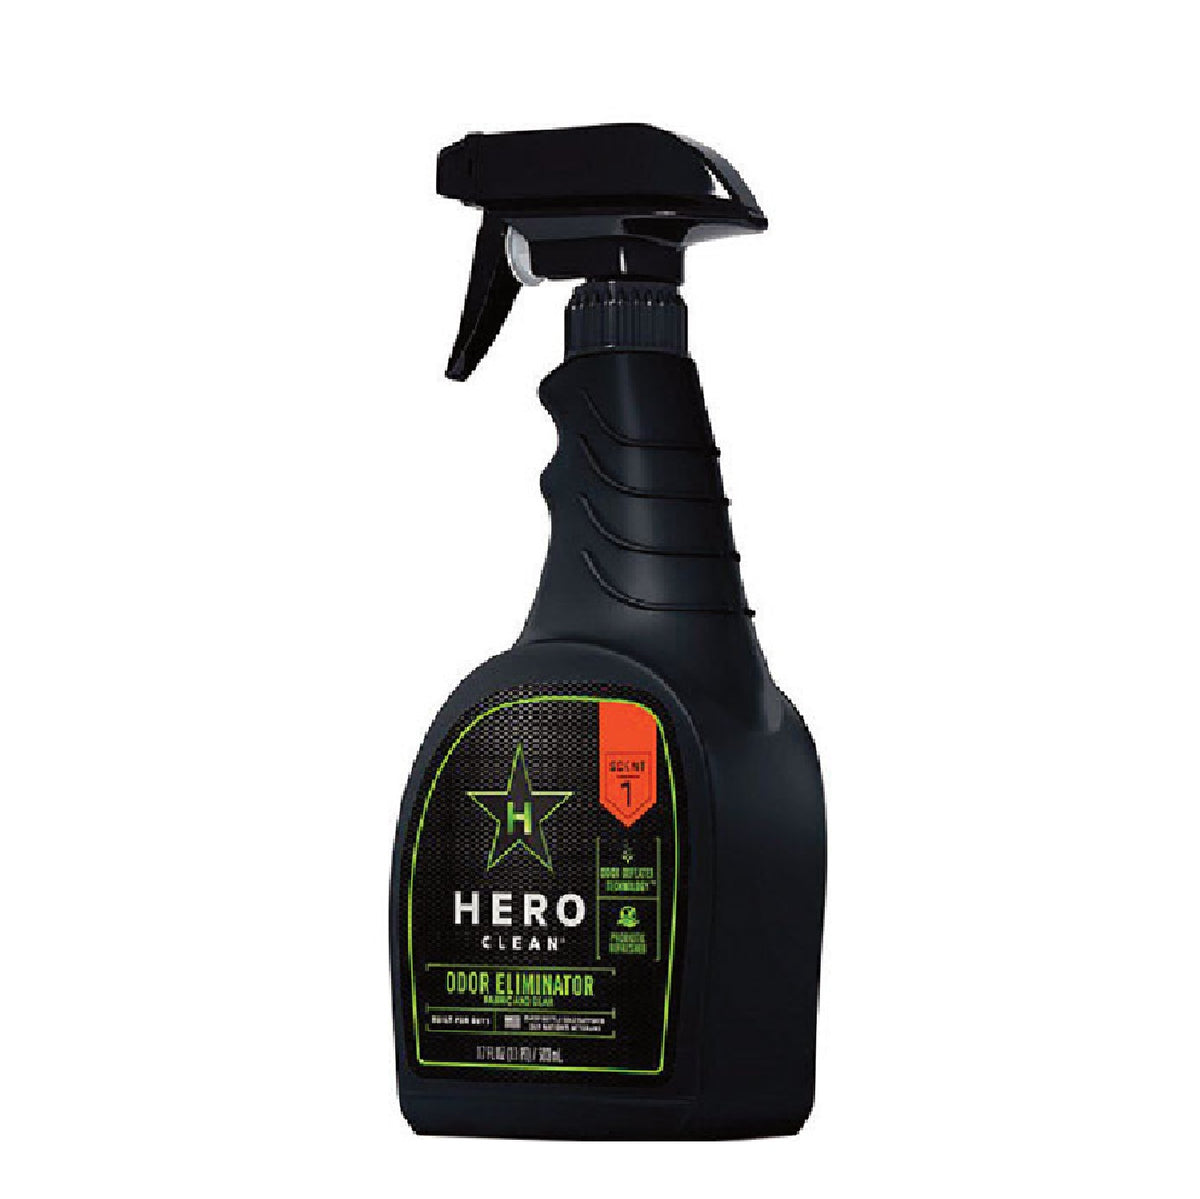 Buy hero odor eliminator - Online store for cleaning supplies, spray in USA, on sale, low price, discount deals, coupon code